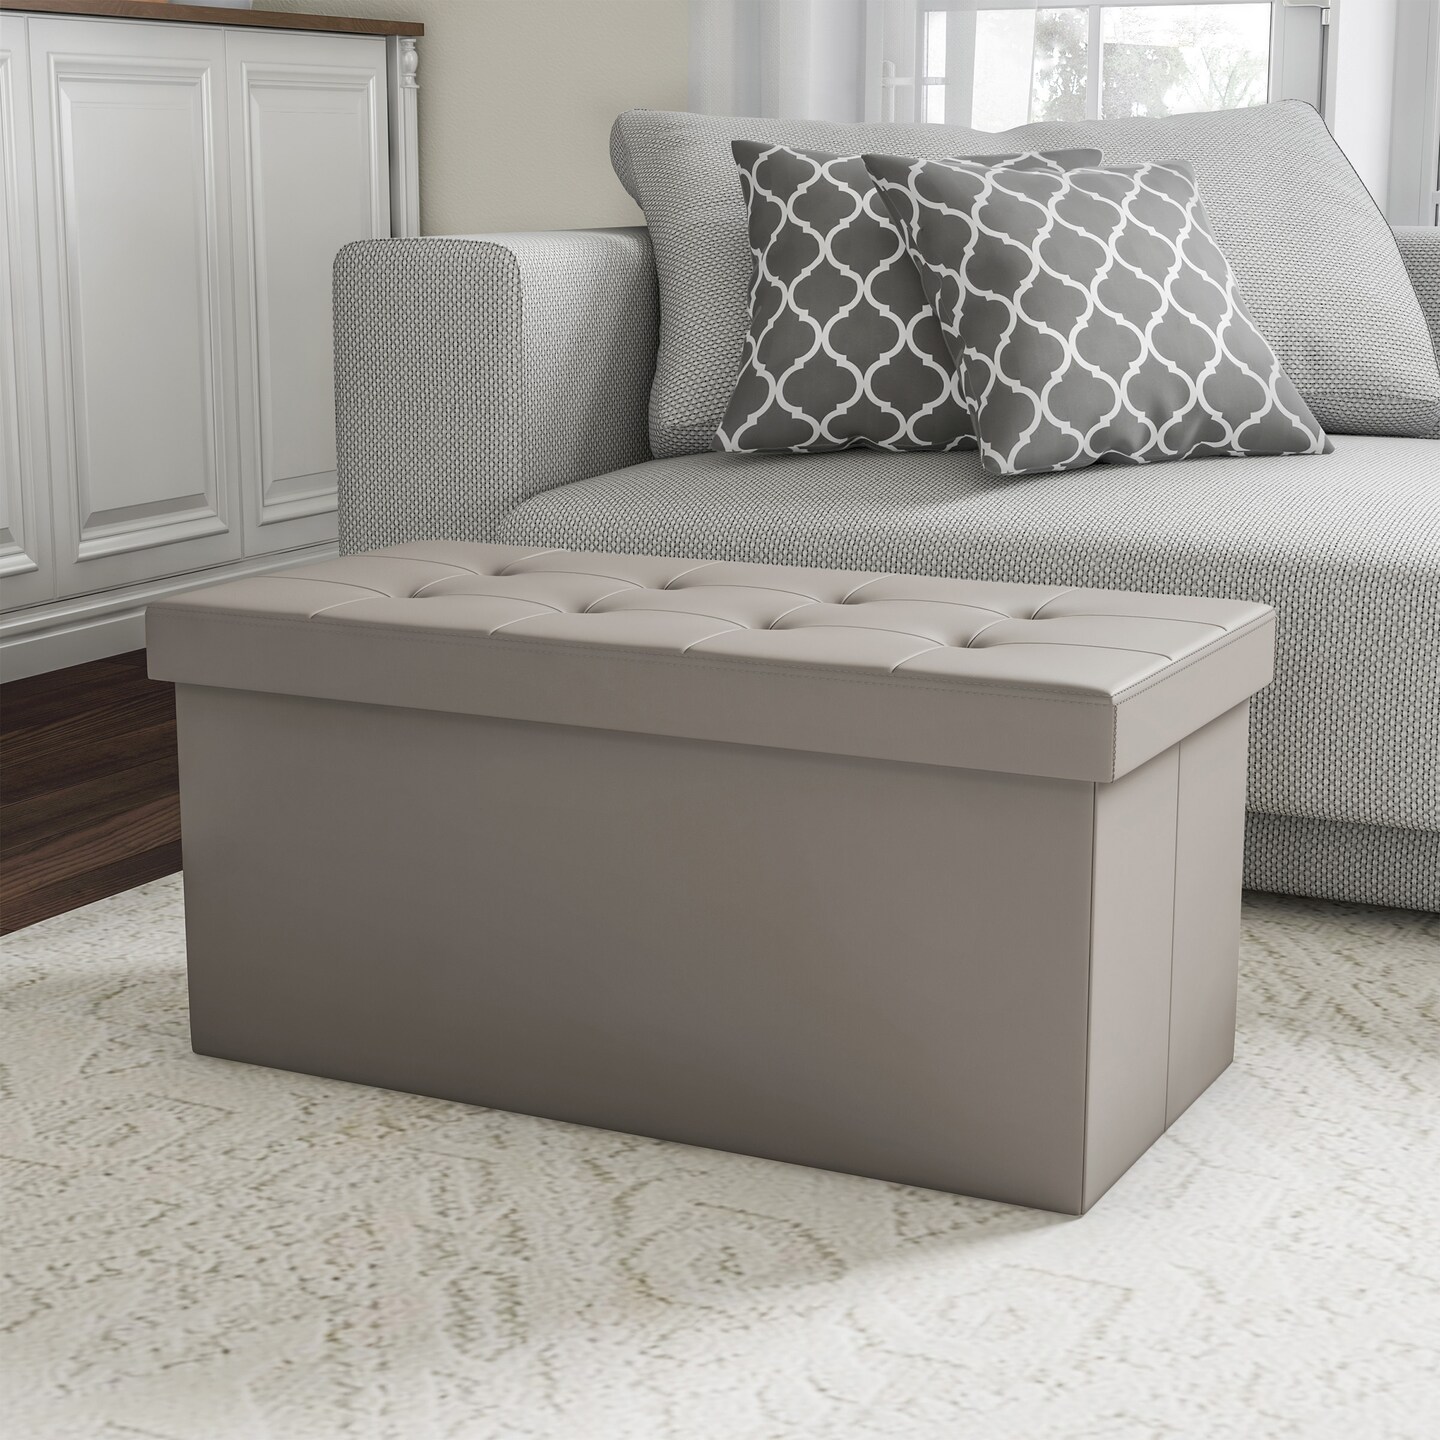 Lavish Home Folding Storage Bench Ottoman Faux Gray Leather- Foam Padded Lid-Removable Bin-Organizer for Home Bedroom